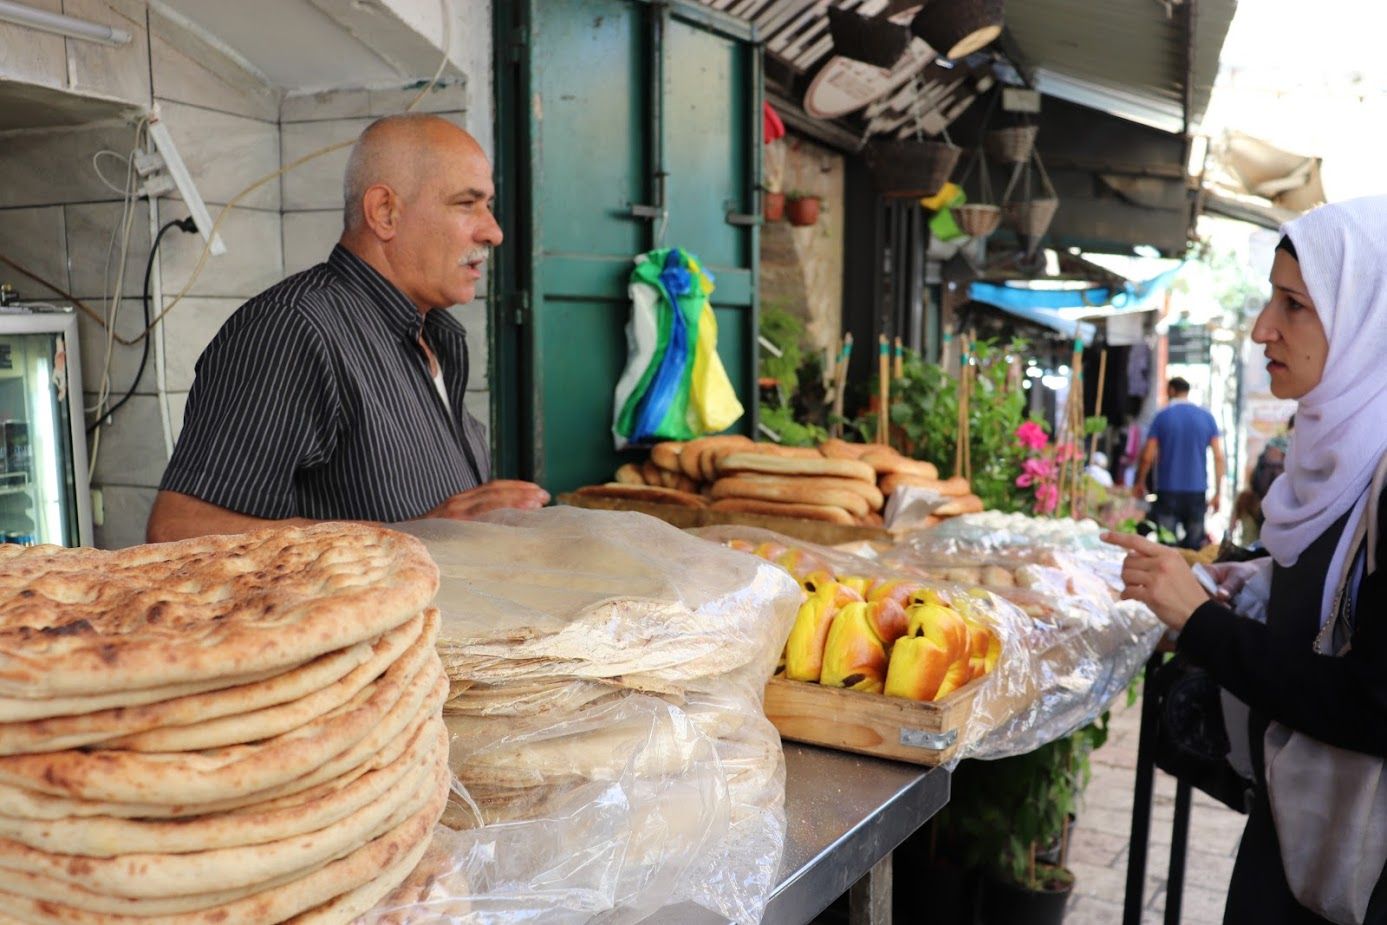 Many Jerusalemites come to the market to buy taboun bread as well as freshly baked items like ka’ak, mana’eesh and pita. Image by Carly Graf. Israel, 2019.